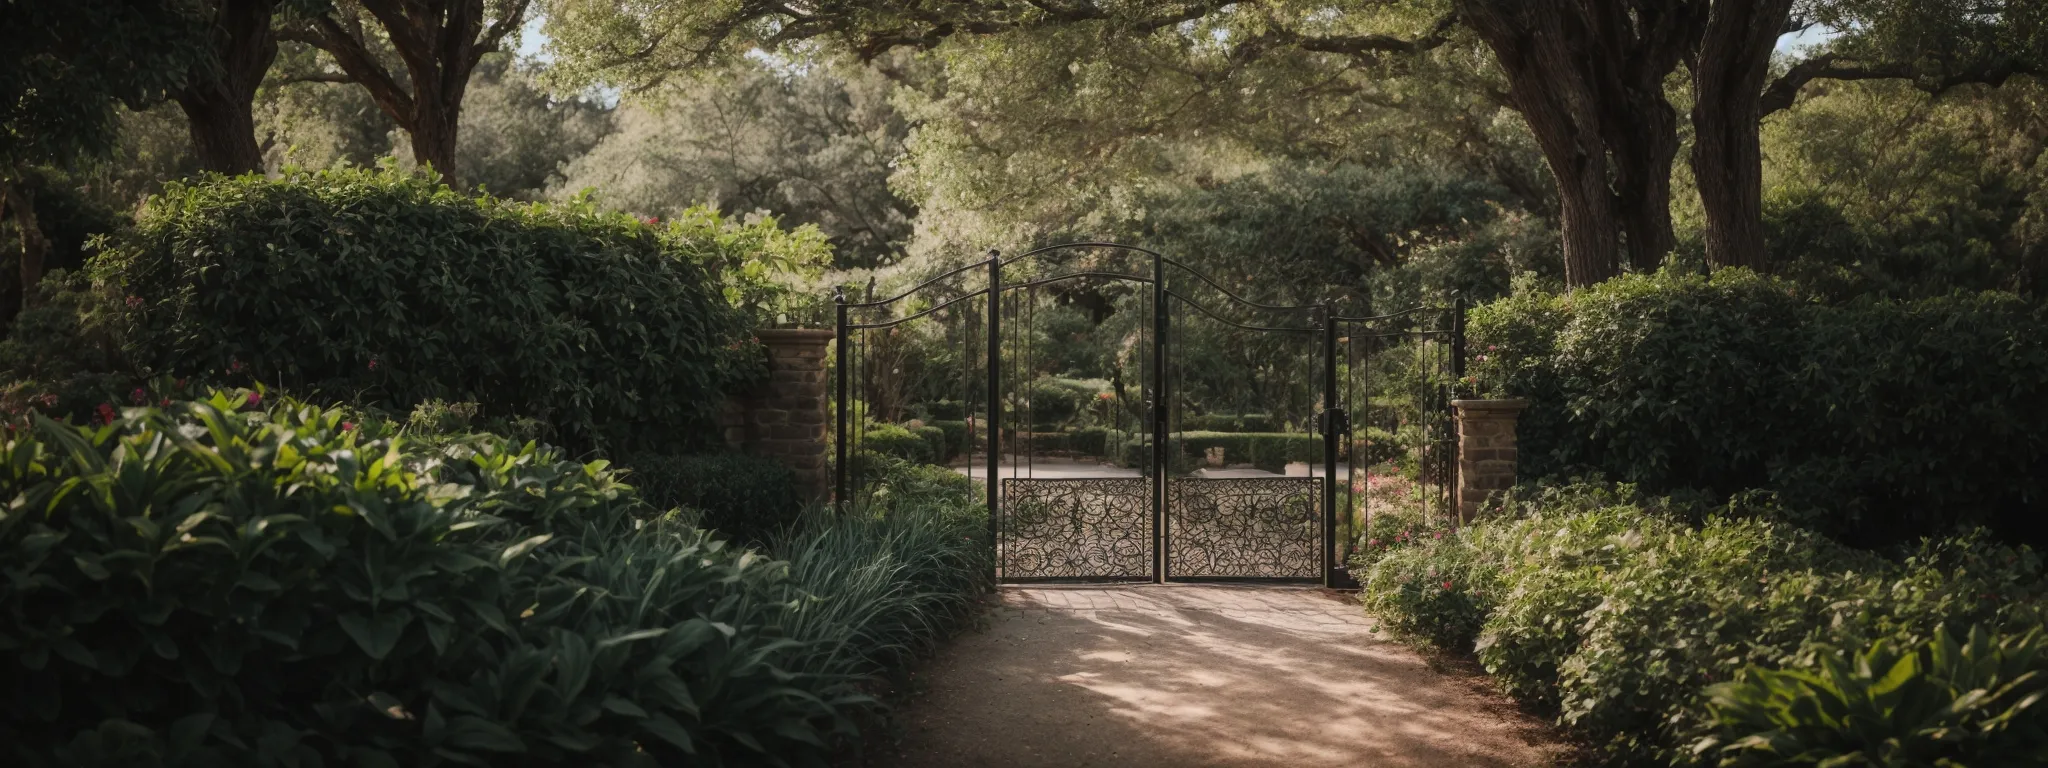 a locked gate at the entrance of a serene garden with a visible path leading towards the center, symbolizing the balance between exclusivity and accessibility.